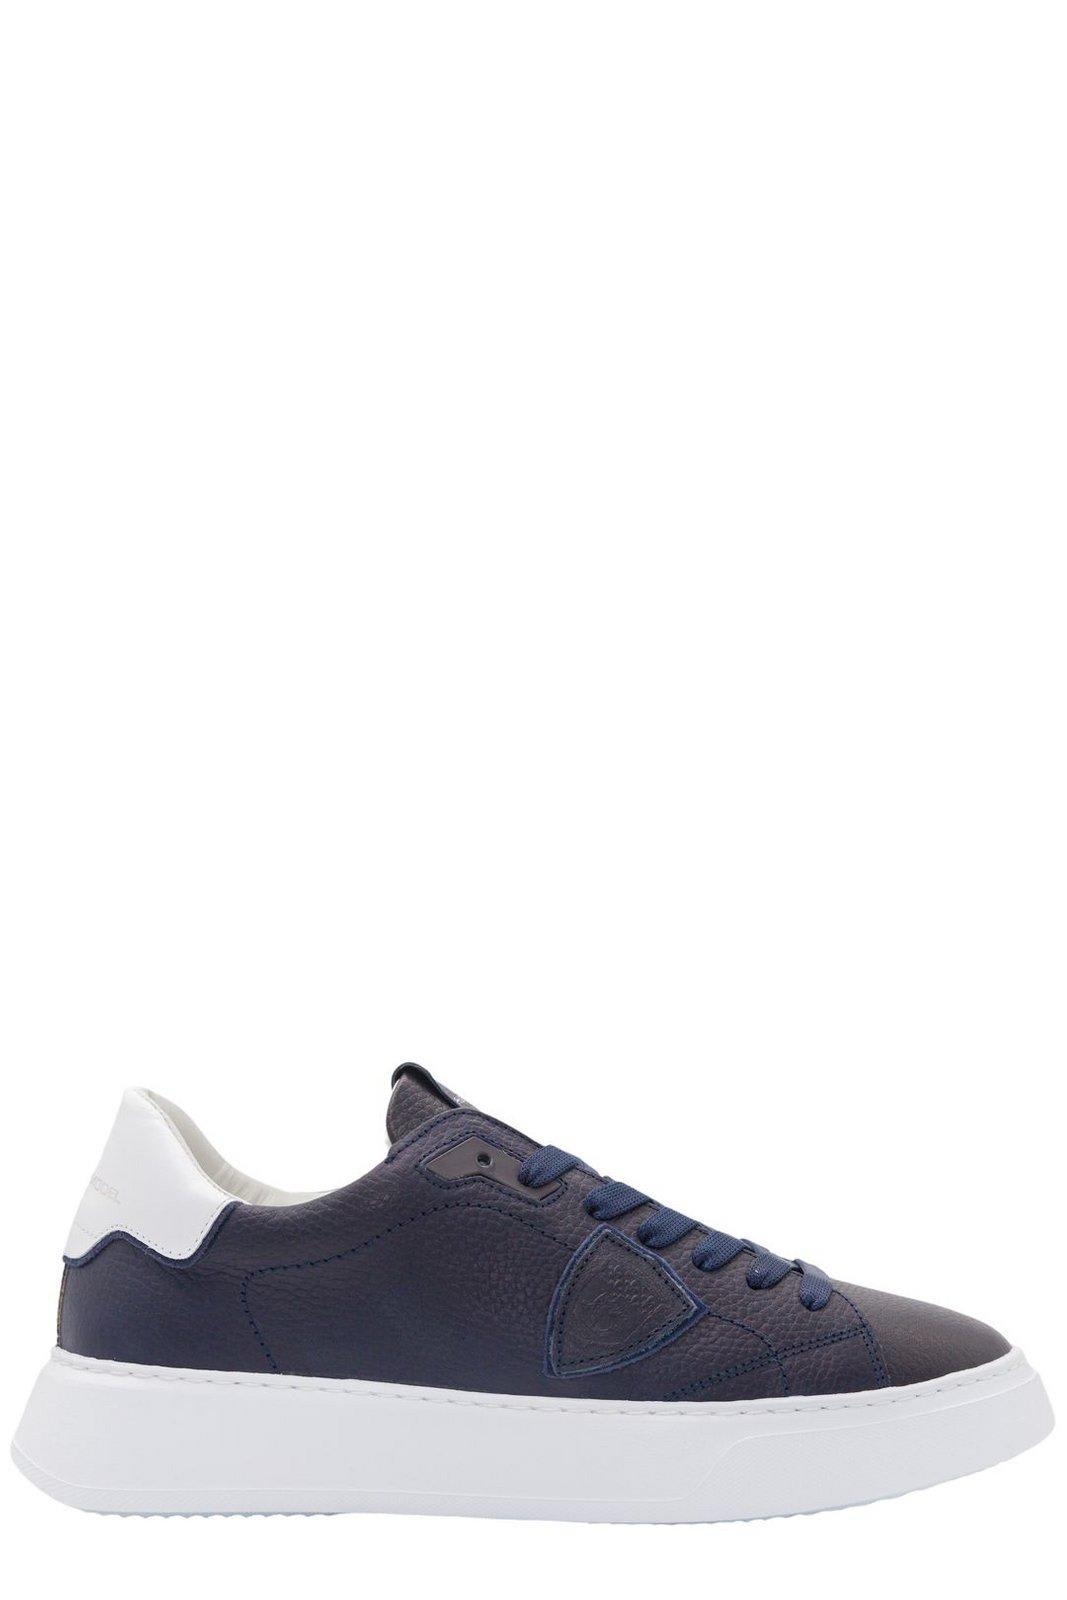 PHILIPPE MODEL TEMPLE VEAU LACE-UP SNEAKERS